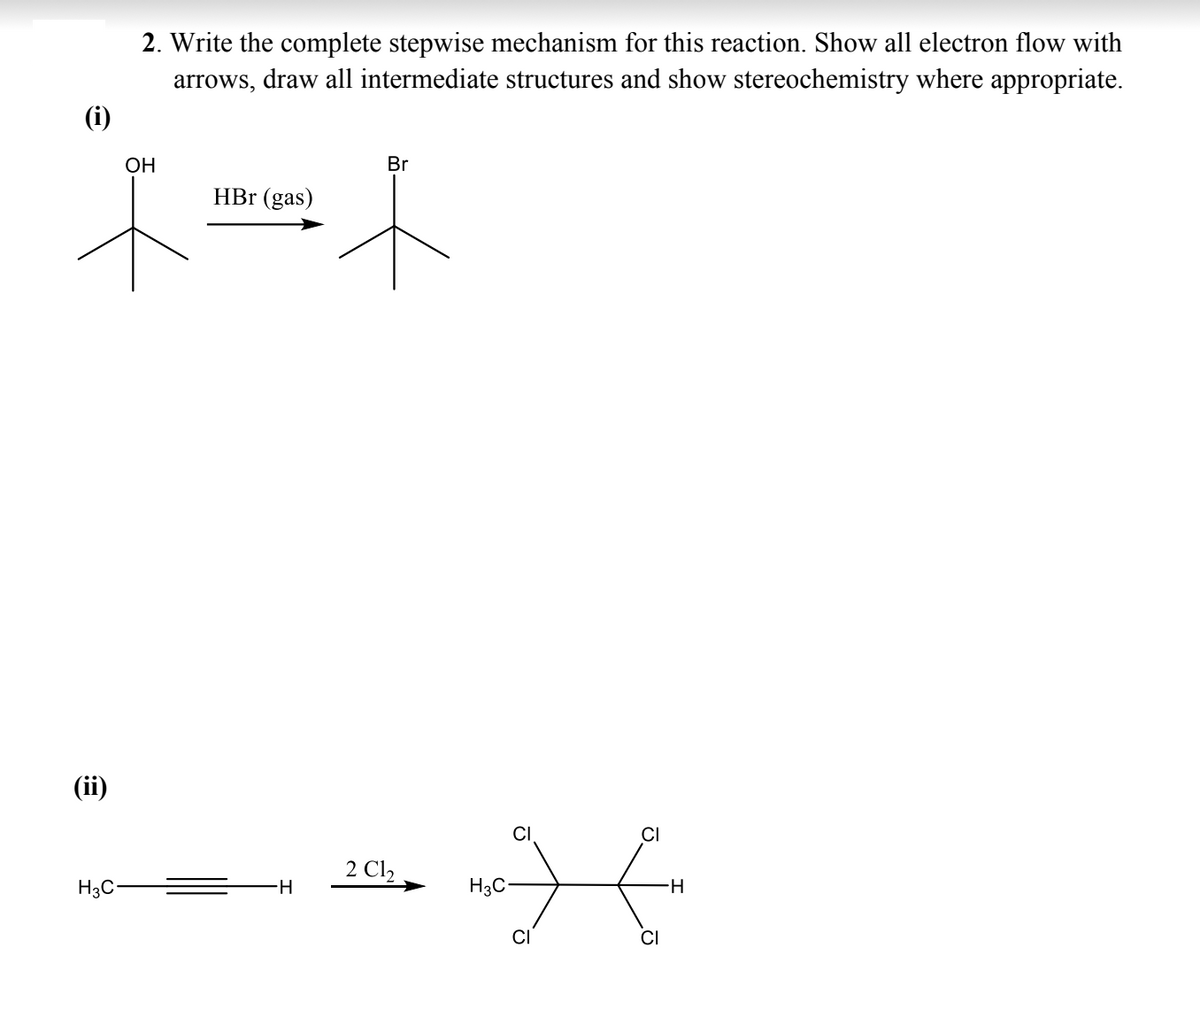 (ii)
2. Write the complete stepwise mechanism for this reaction. Show all electron flow with
arrows, draw all intermediate structures and show stereochemistry where appropriate.
H3C
OH
HBr (gas)
Br
LA
2 C1,
H
H3C
CI
CI
CI
-H